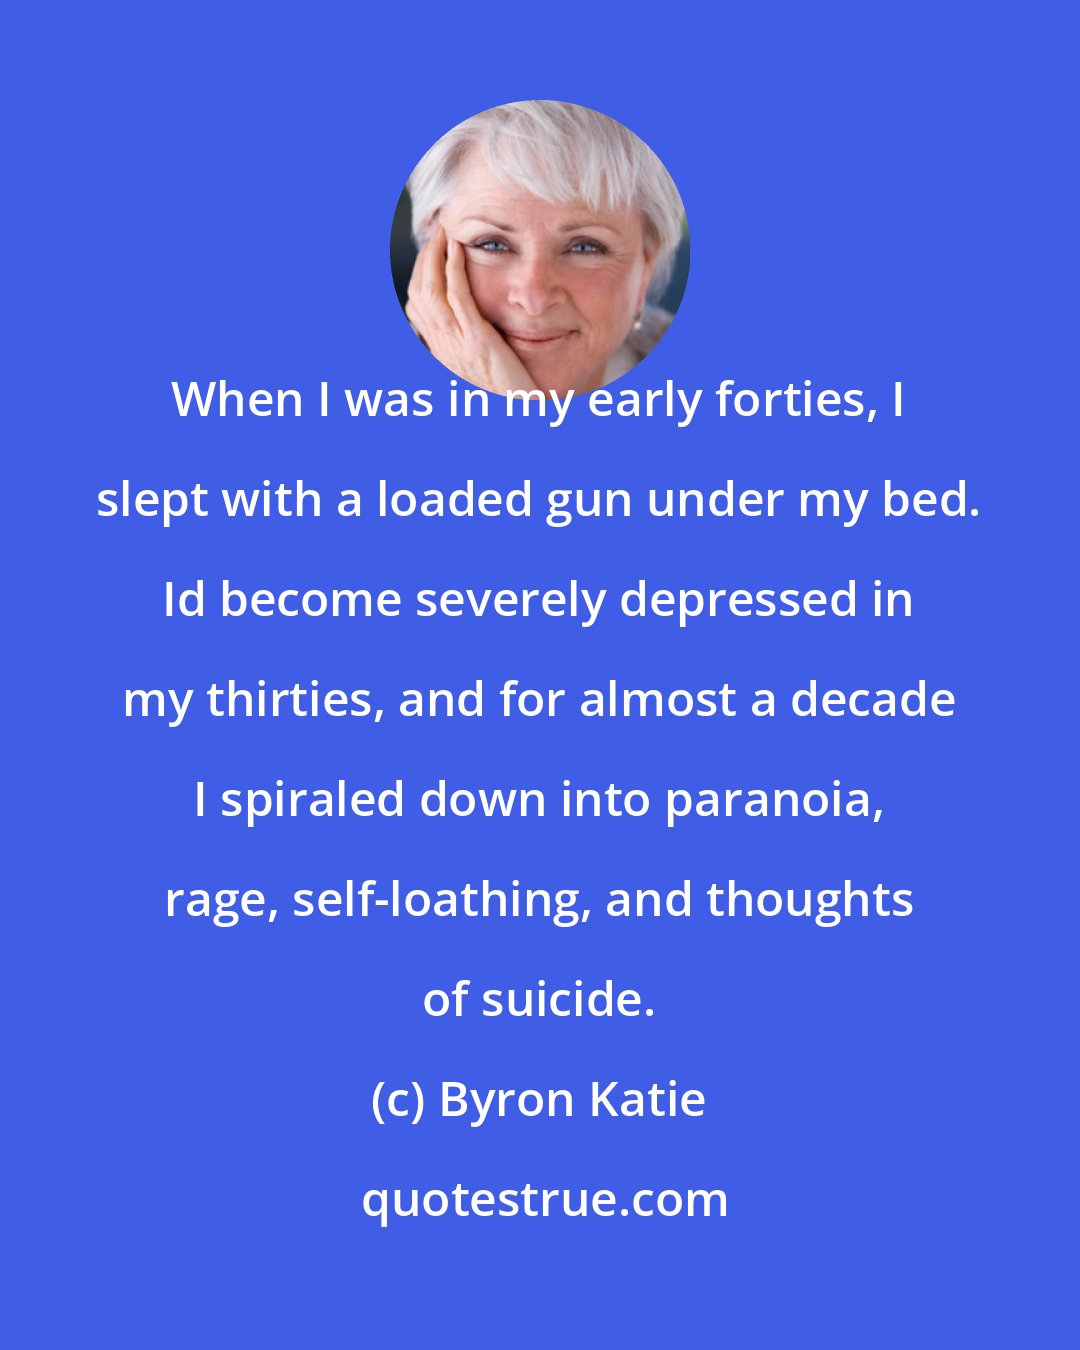 Byron Katie: When I was in my early forties, I slept with a loaded gun under my bed. Id become severely depressed in my thirties, and for almost a decade I spiraled down into paranoia, rage, self-loathing, and thoughts of suicide.